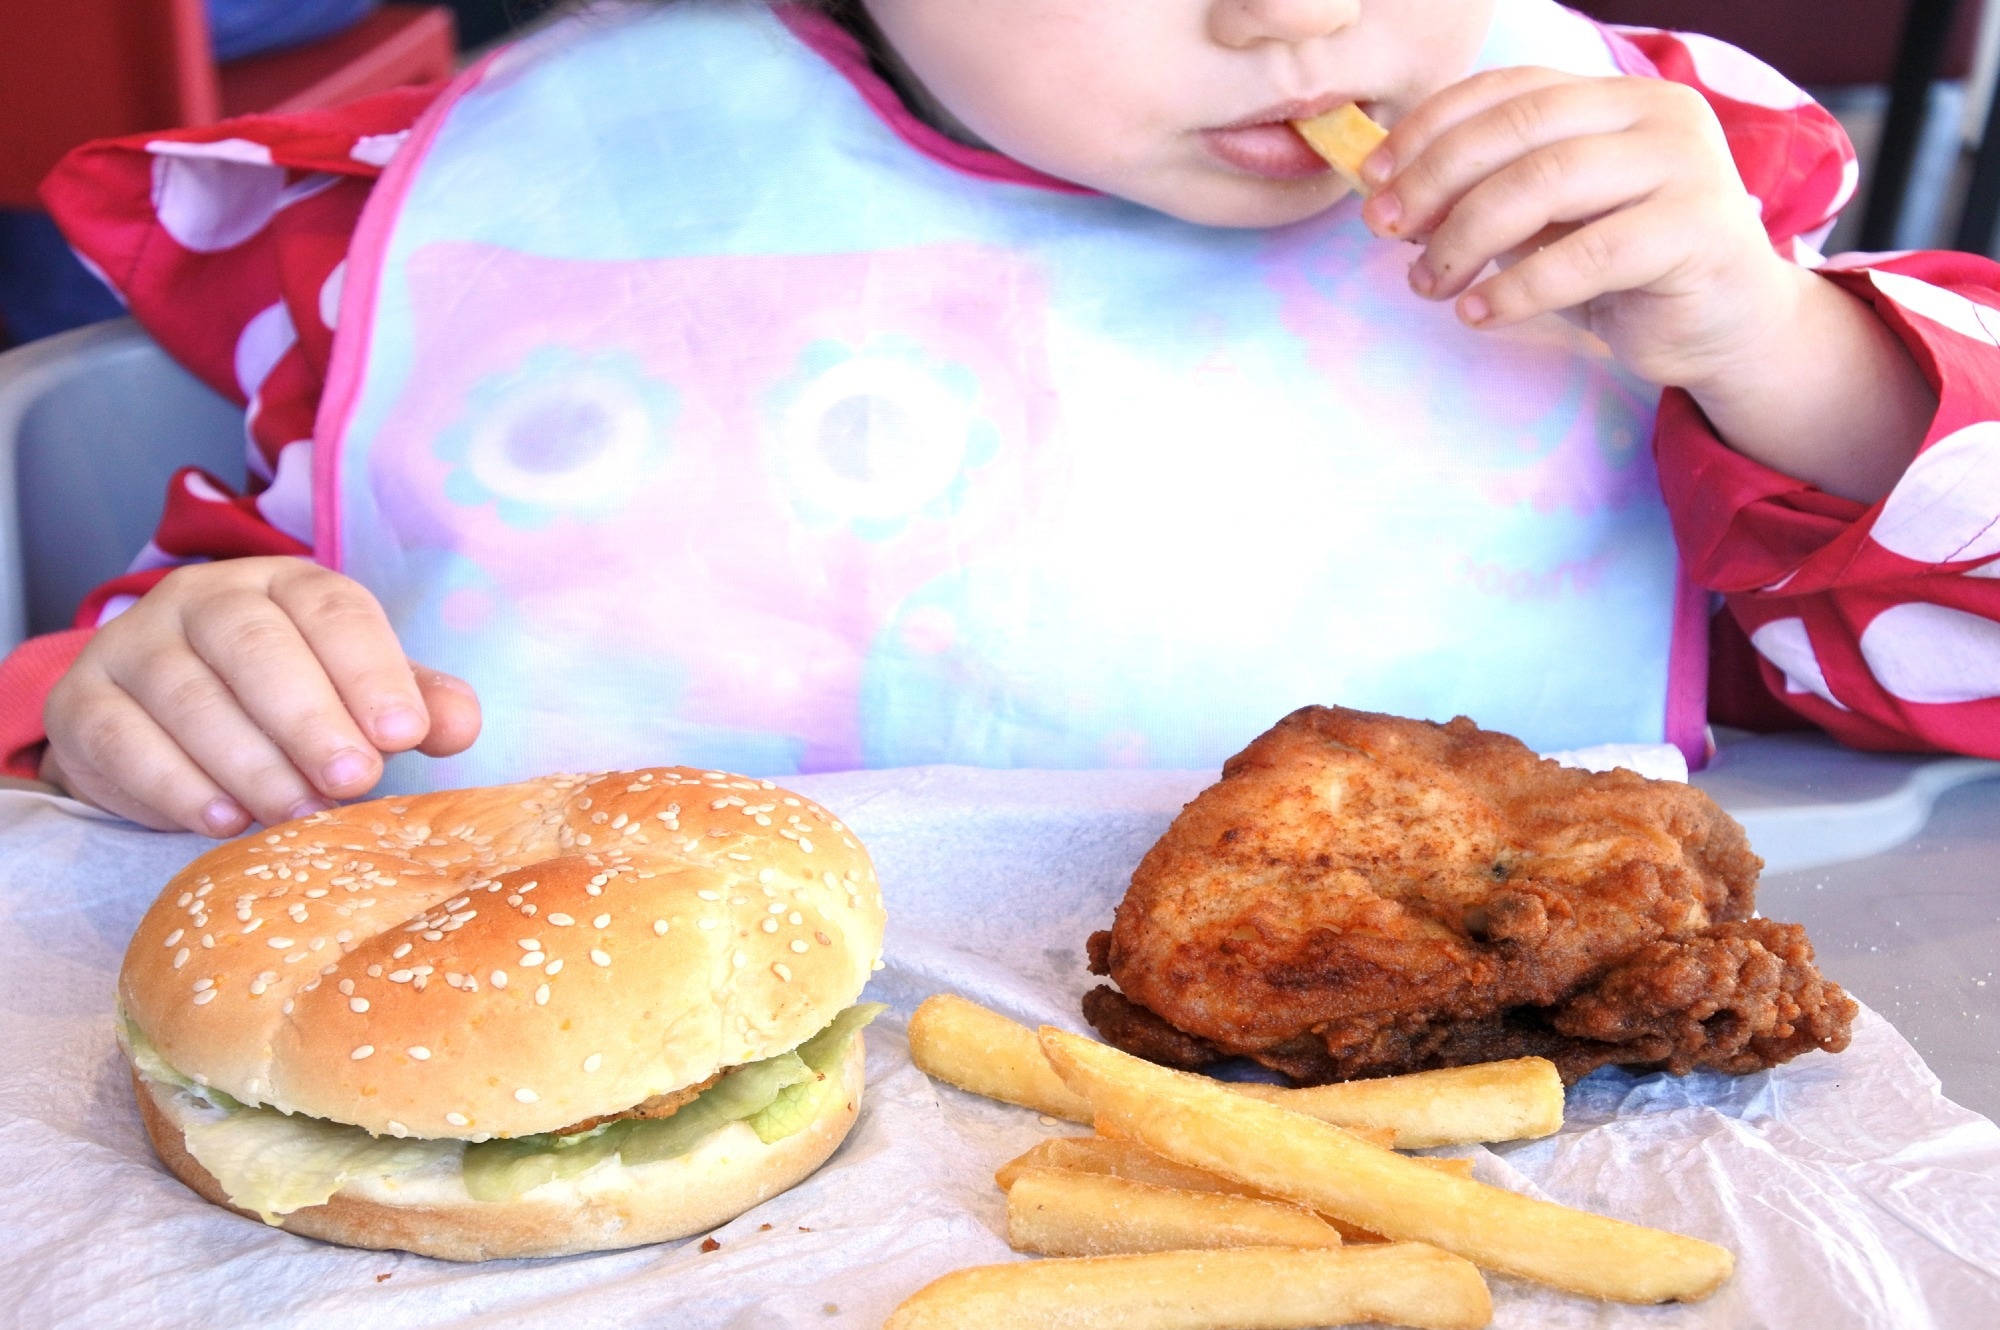 Study: Childhood and Adolescent Obesity: A Review. Image Credit: ChameleonsEye / Shutterstock